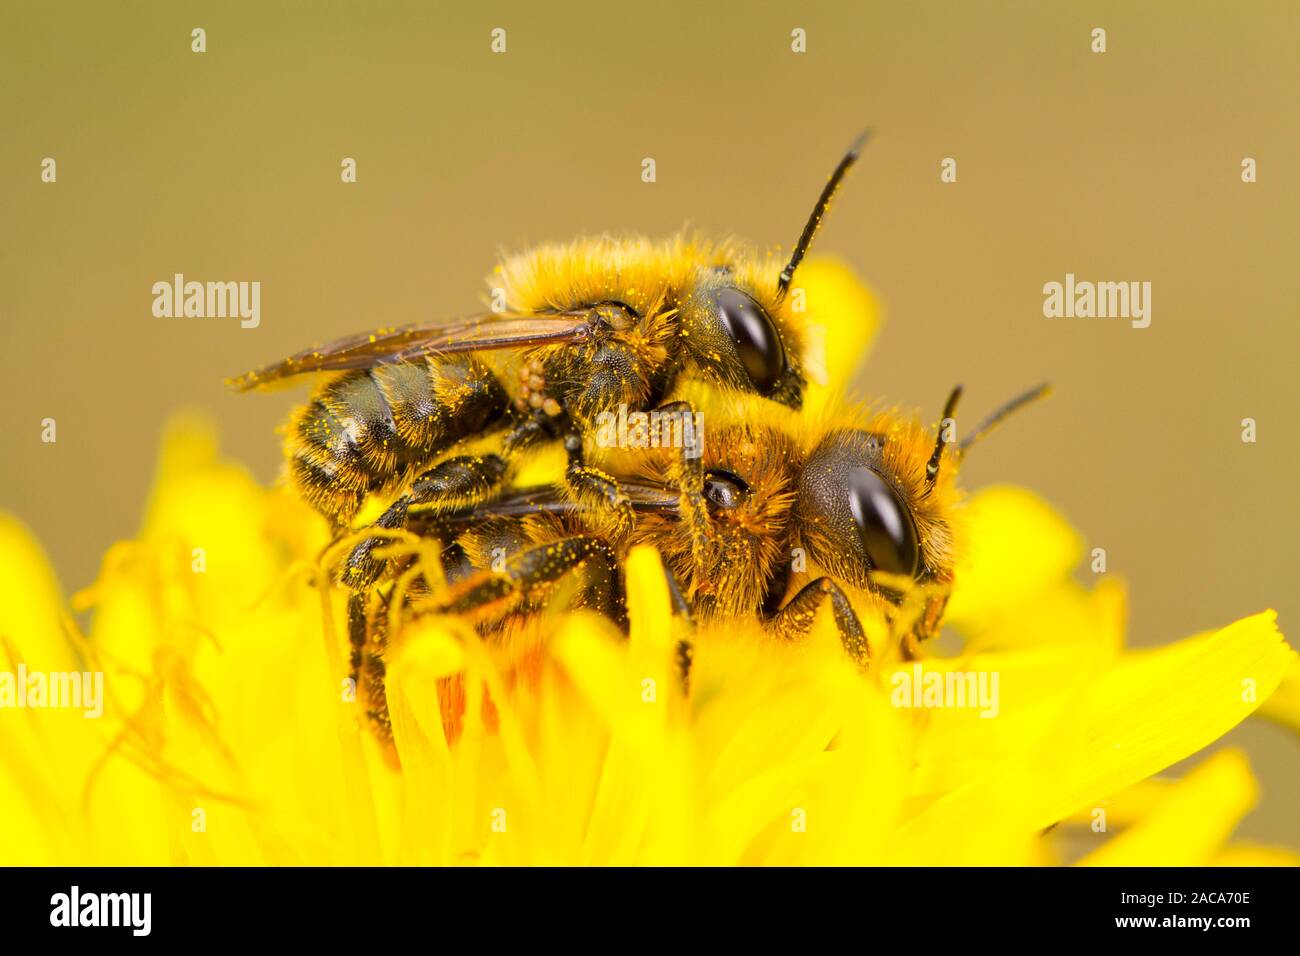 Orange-vented Mason bees (Osmia leaiana) adults mating in a dandelion flower. Powys, Wales. May. Stock Photo